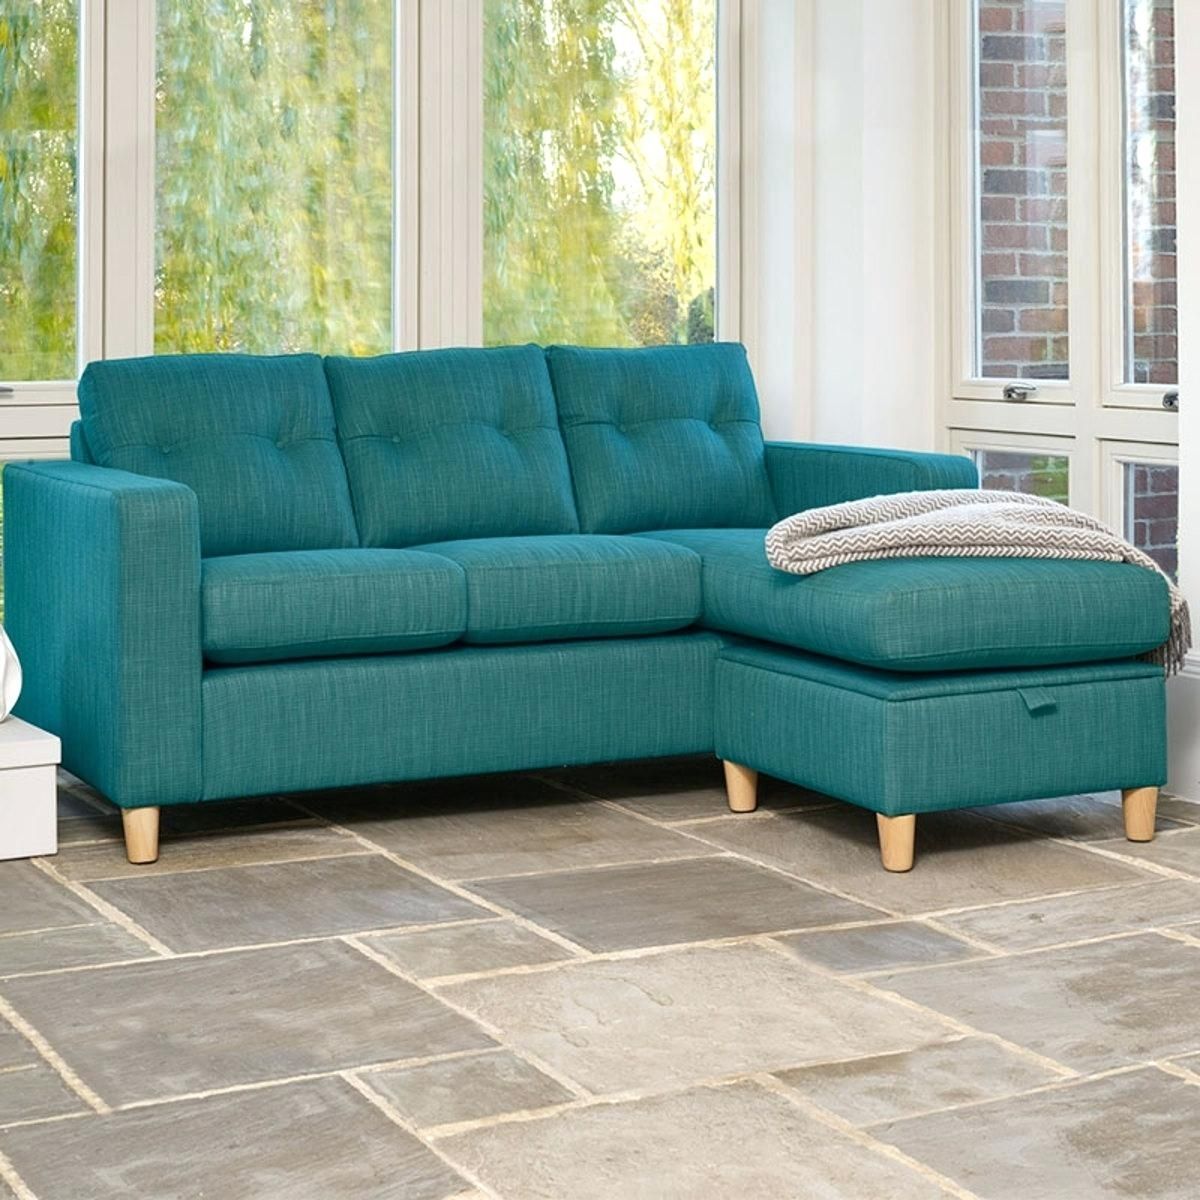 Teal Sofa Bed Target Sectional Sofas For Sale With Regard To Target Sectional Sofas (Photo 9 of 10)